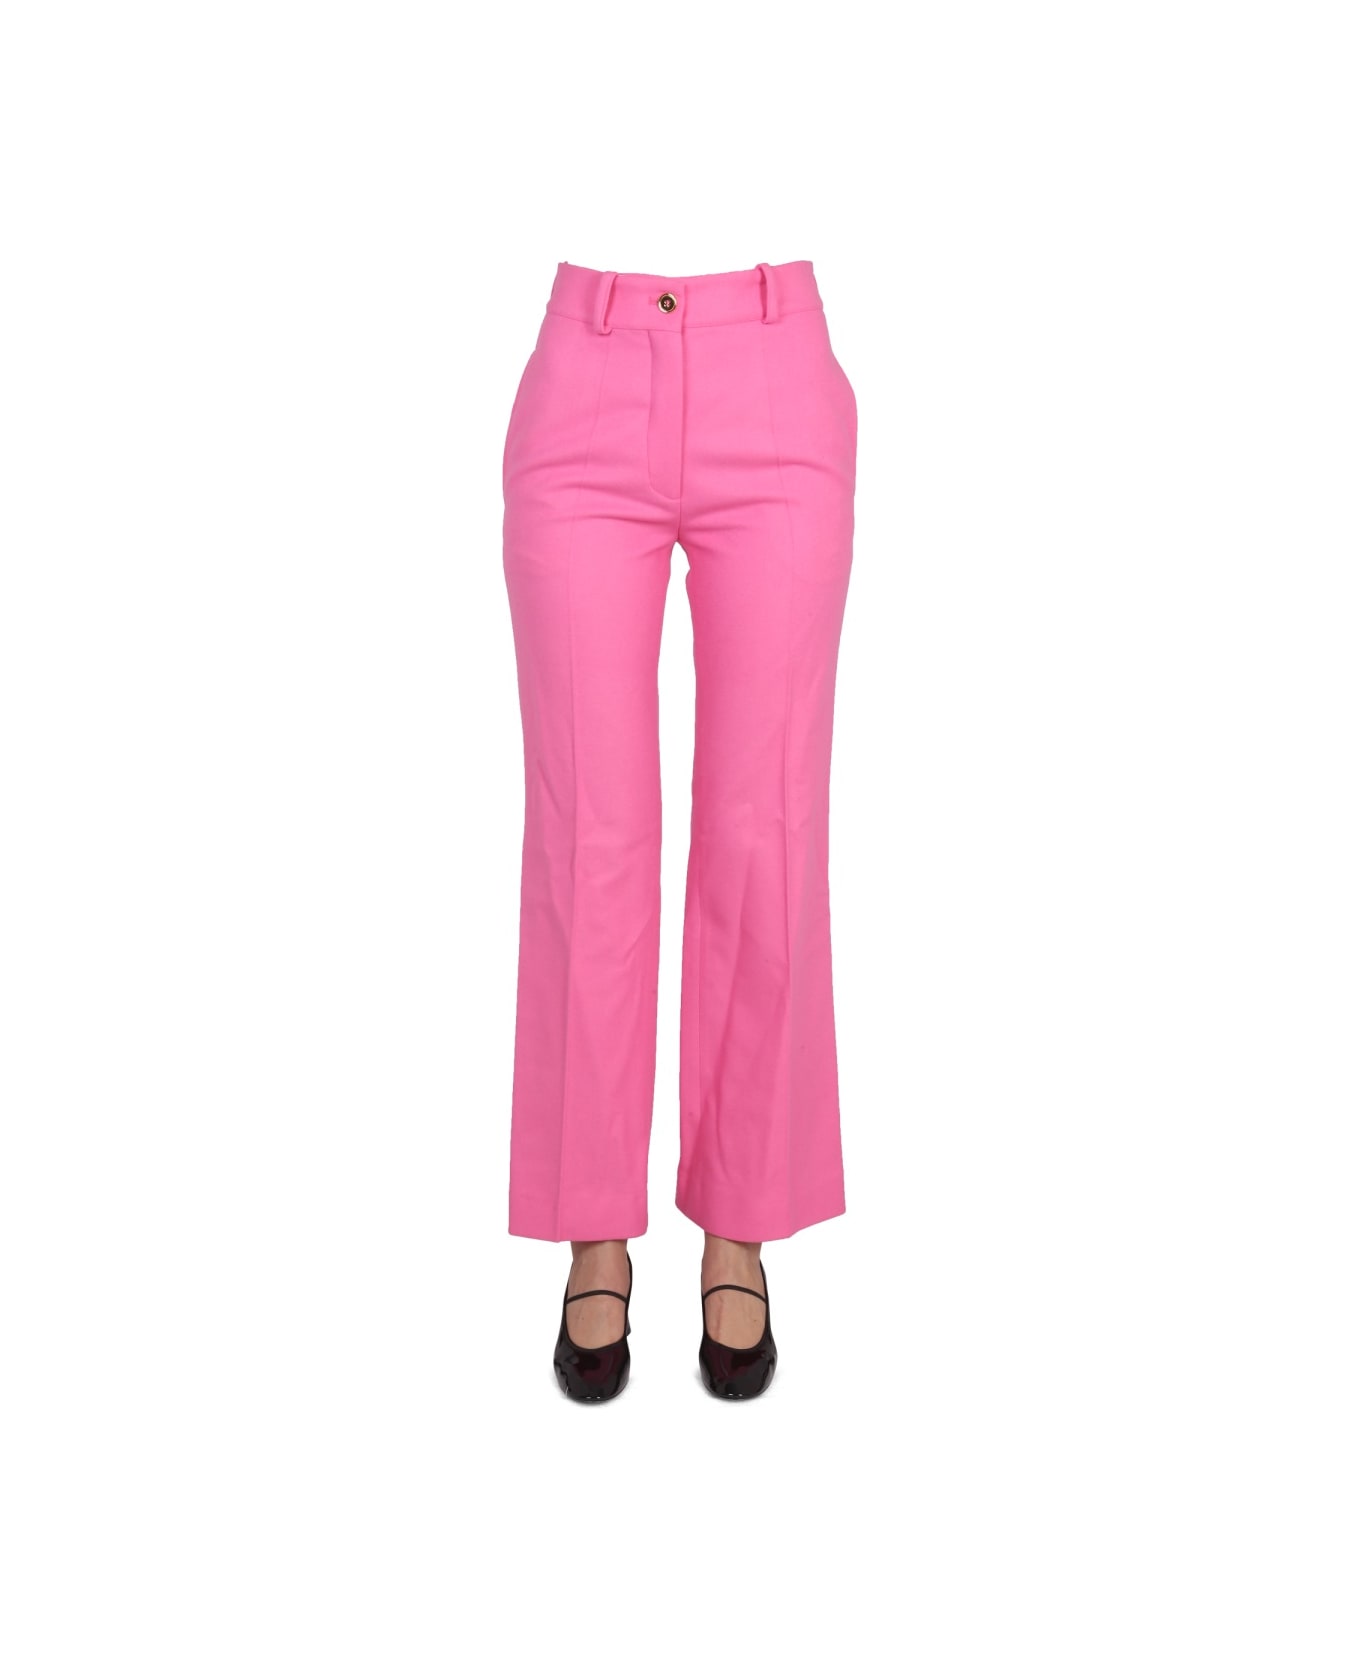 Patou Bell Bottoms - PINK